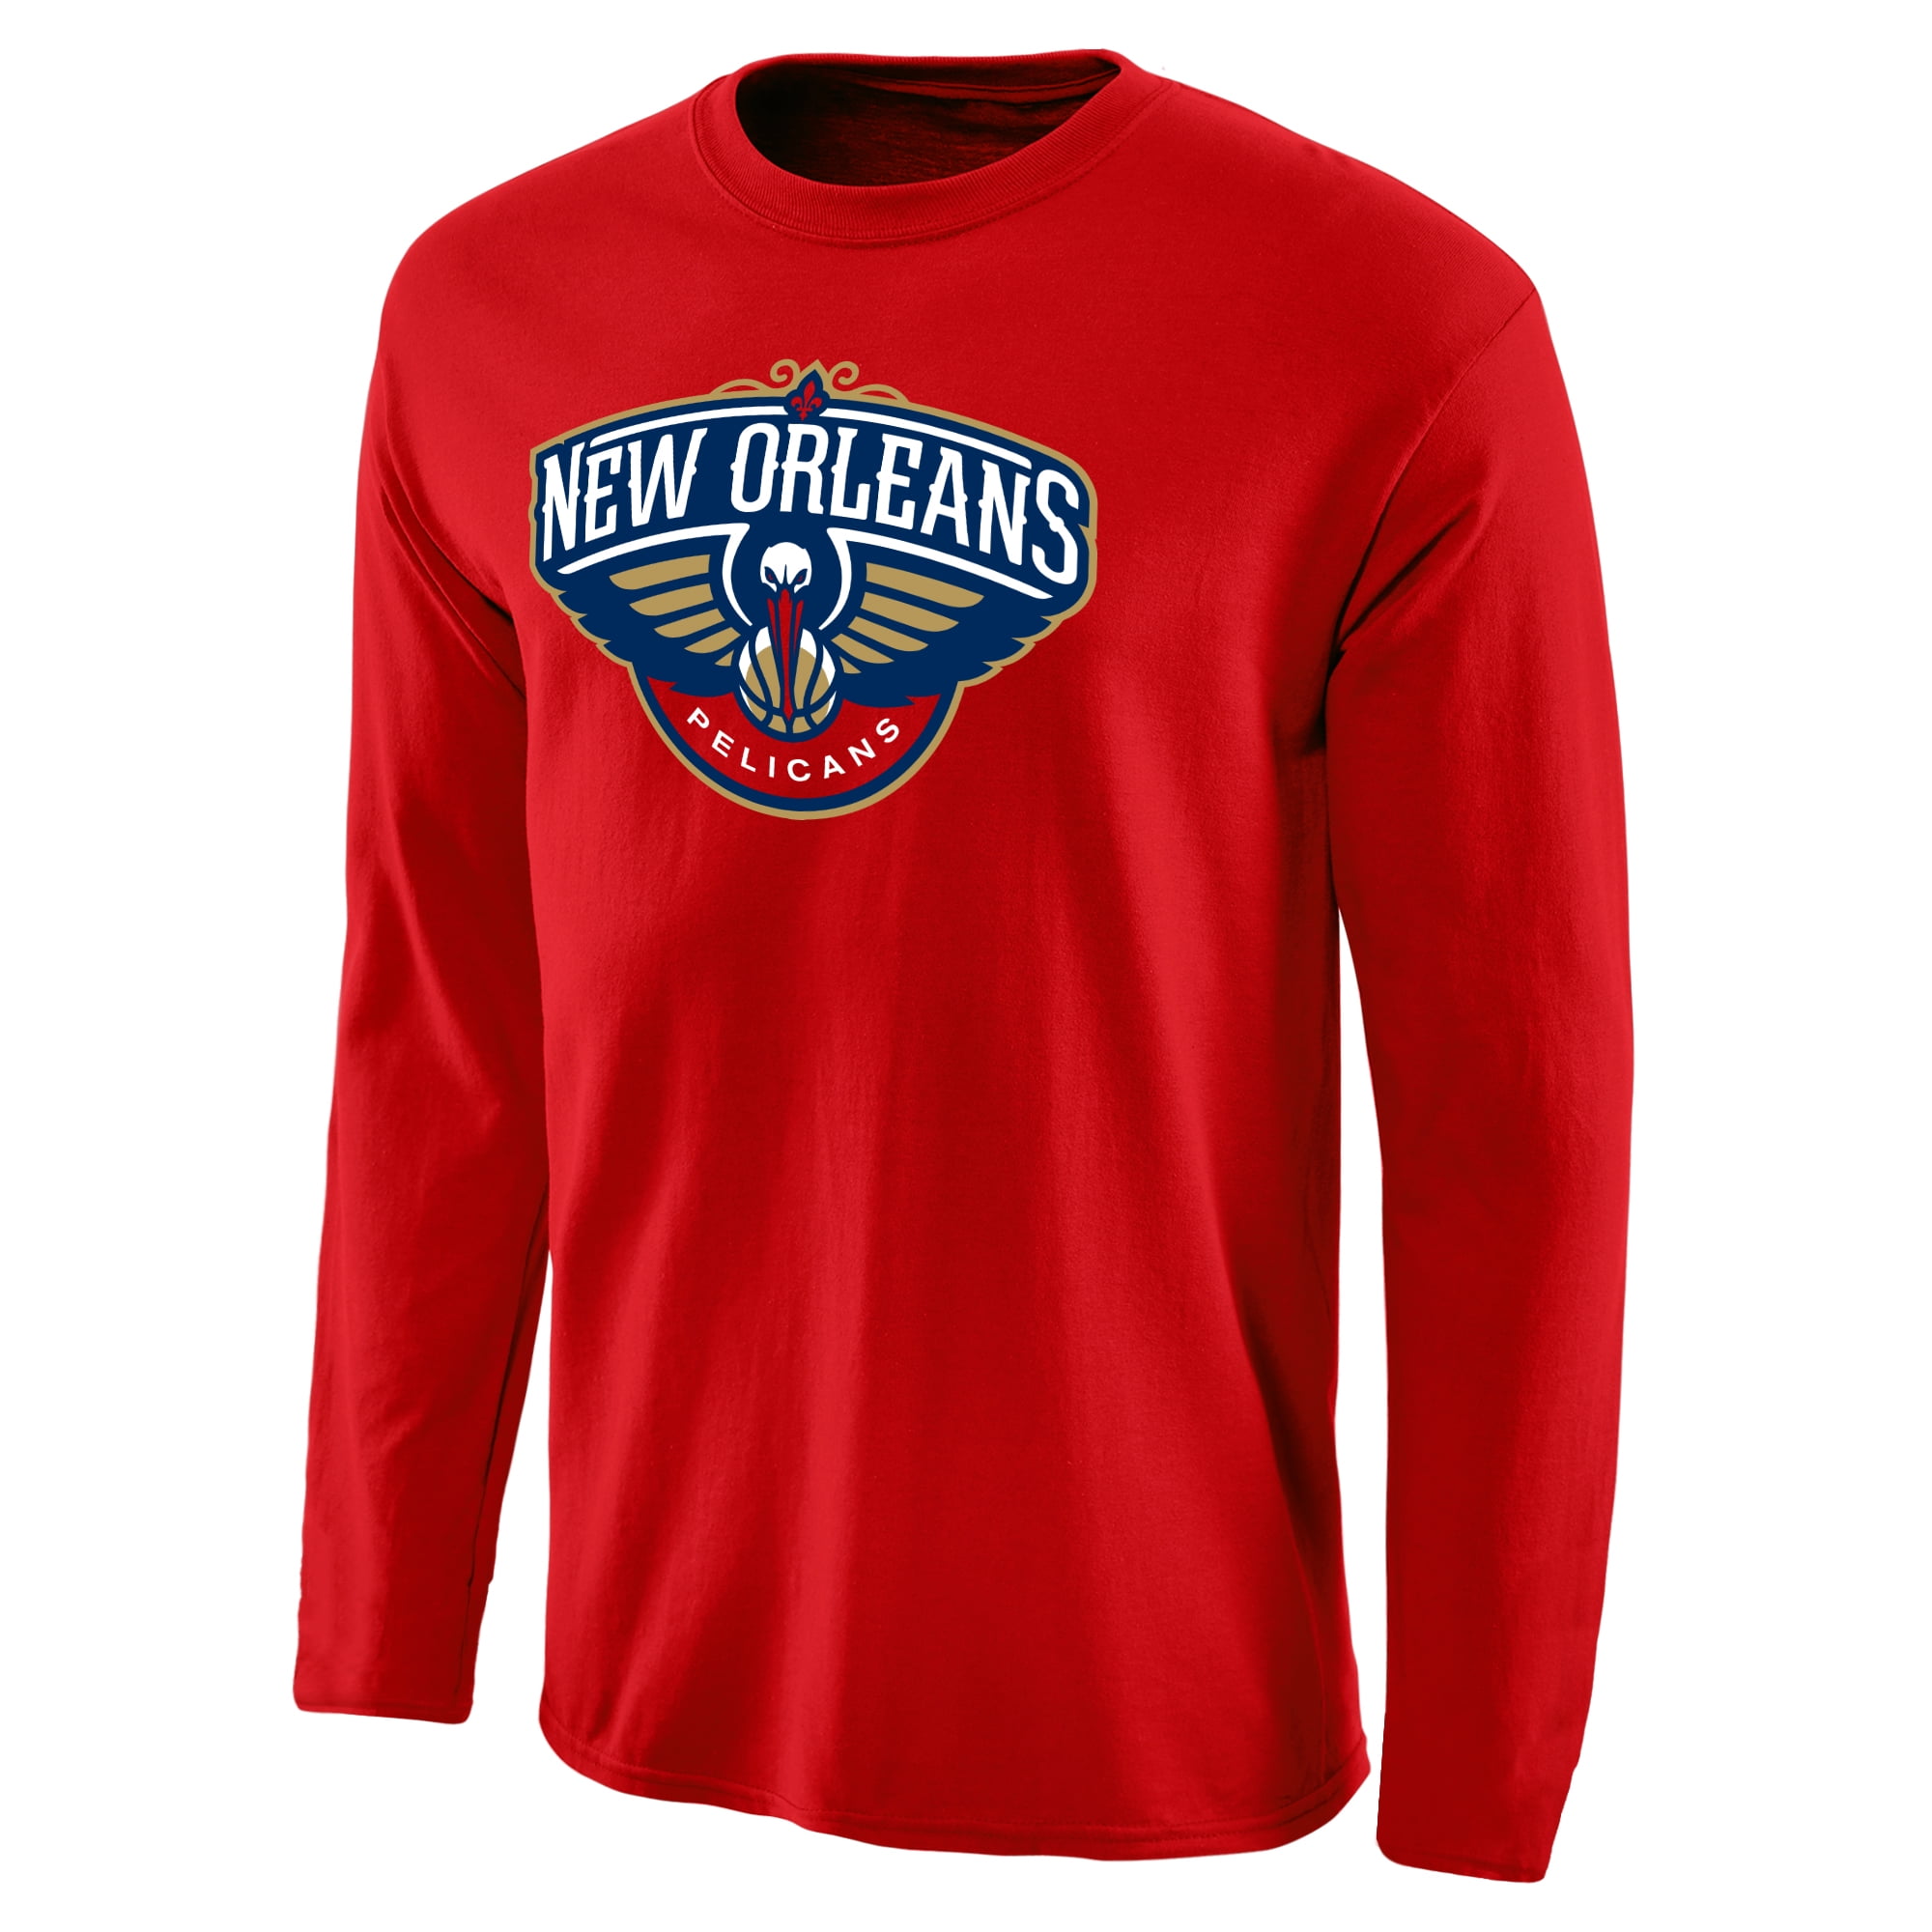 Primary Logo Long Sleeve T-Shirt - Red 